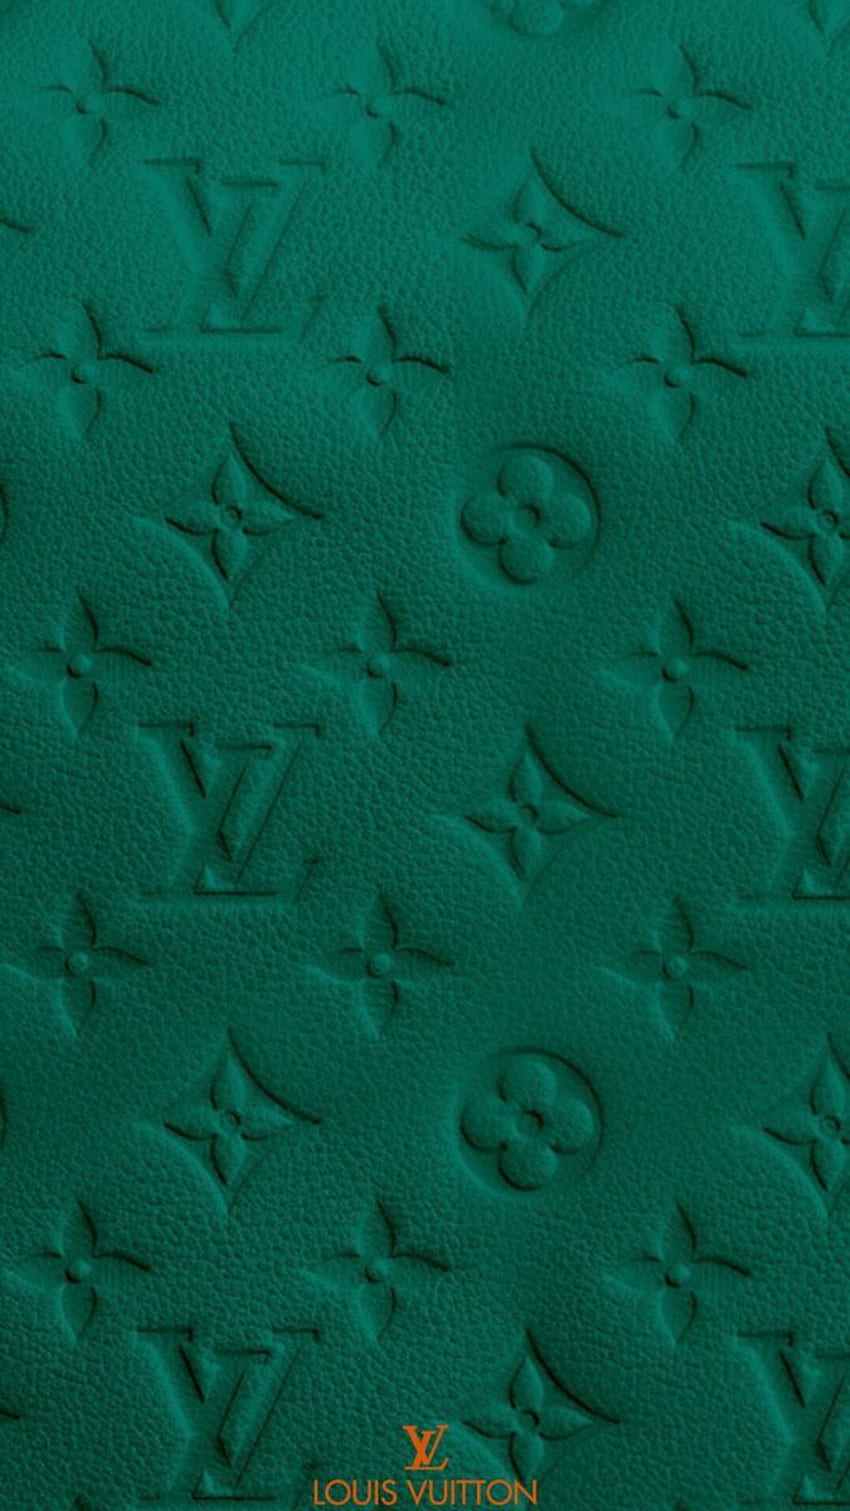 Louis Vuitton wallpaper for iPhone with high-resolution 1080x1920 pixel. You can use this wallpaper for your iPhone 5, 6, 7, 8, X, XS, XR backgrounds, Mobile Screensaver, or iPad Lock Screen - Dark green